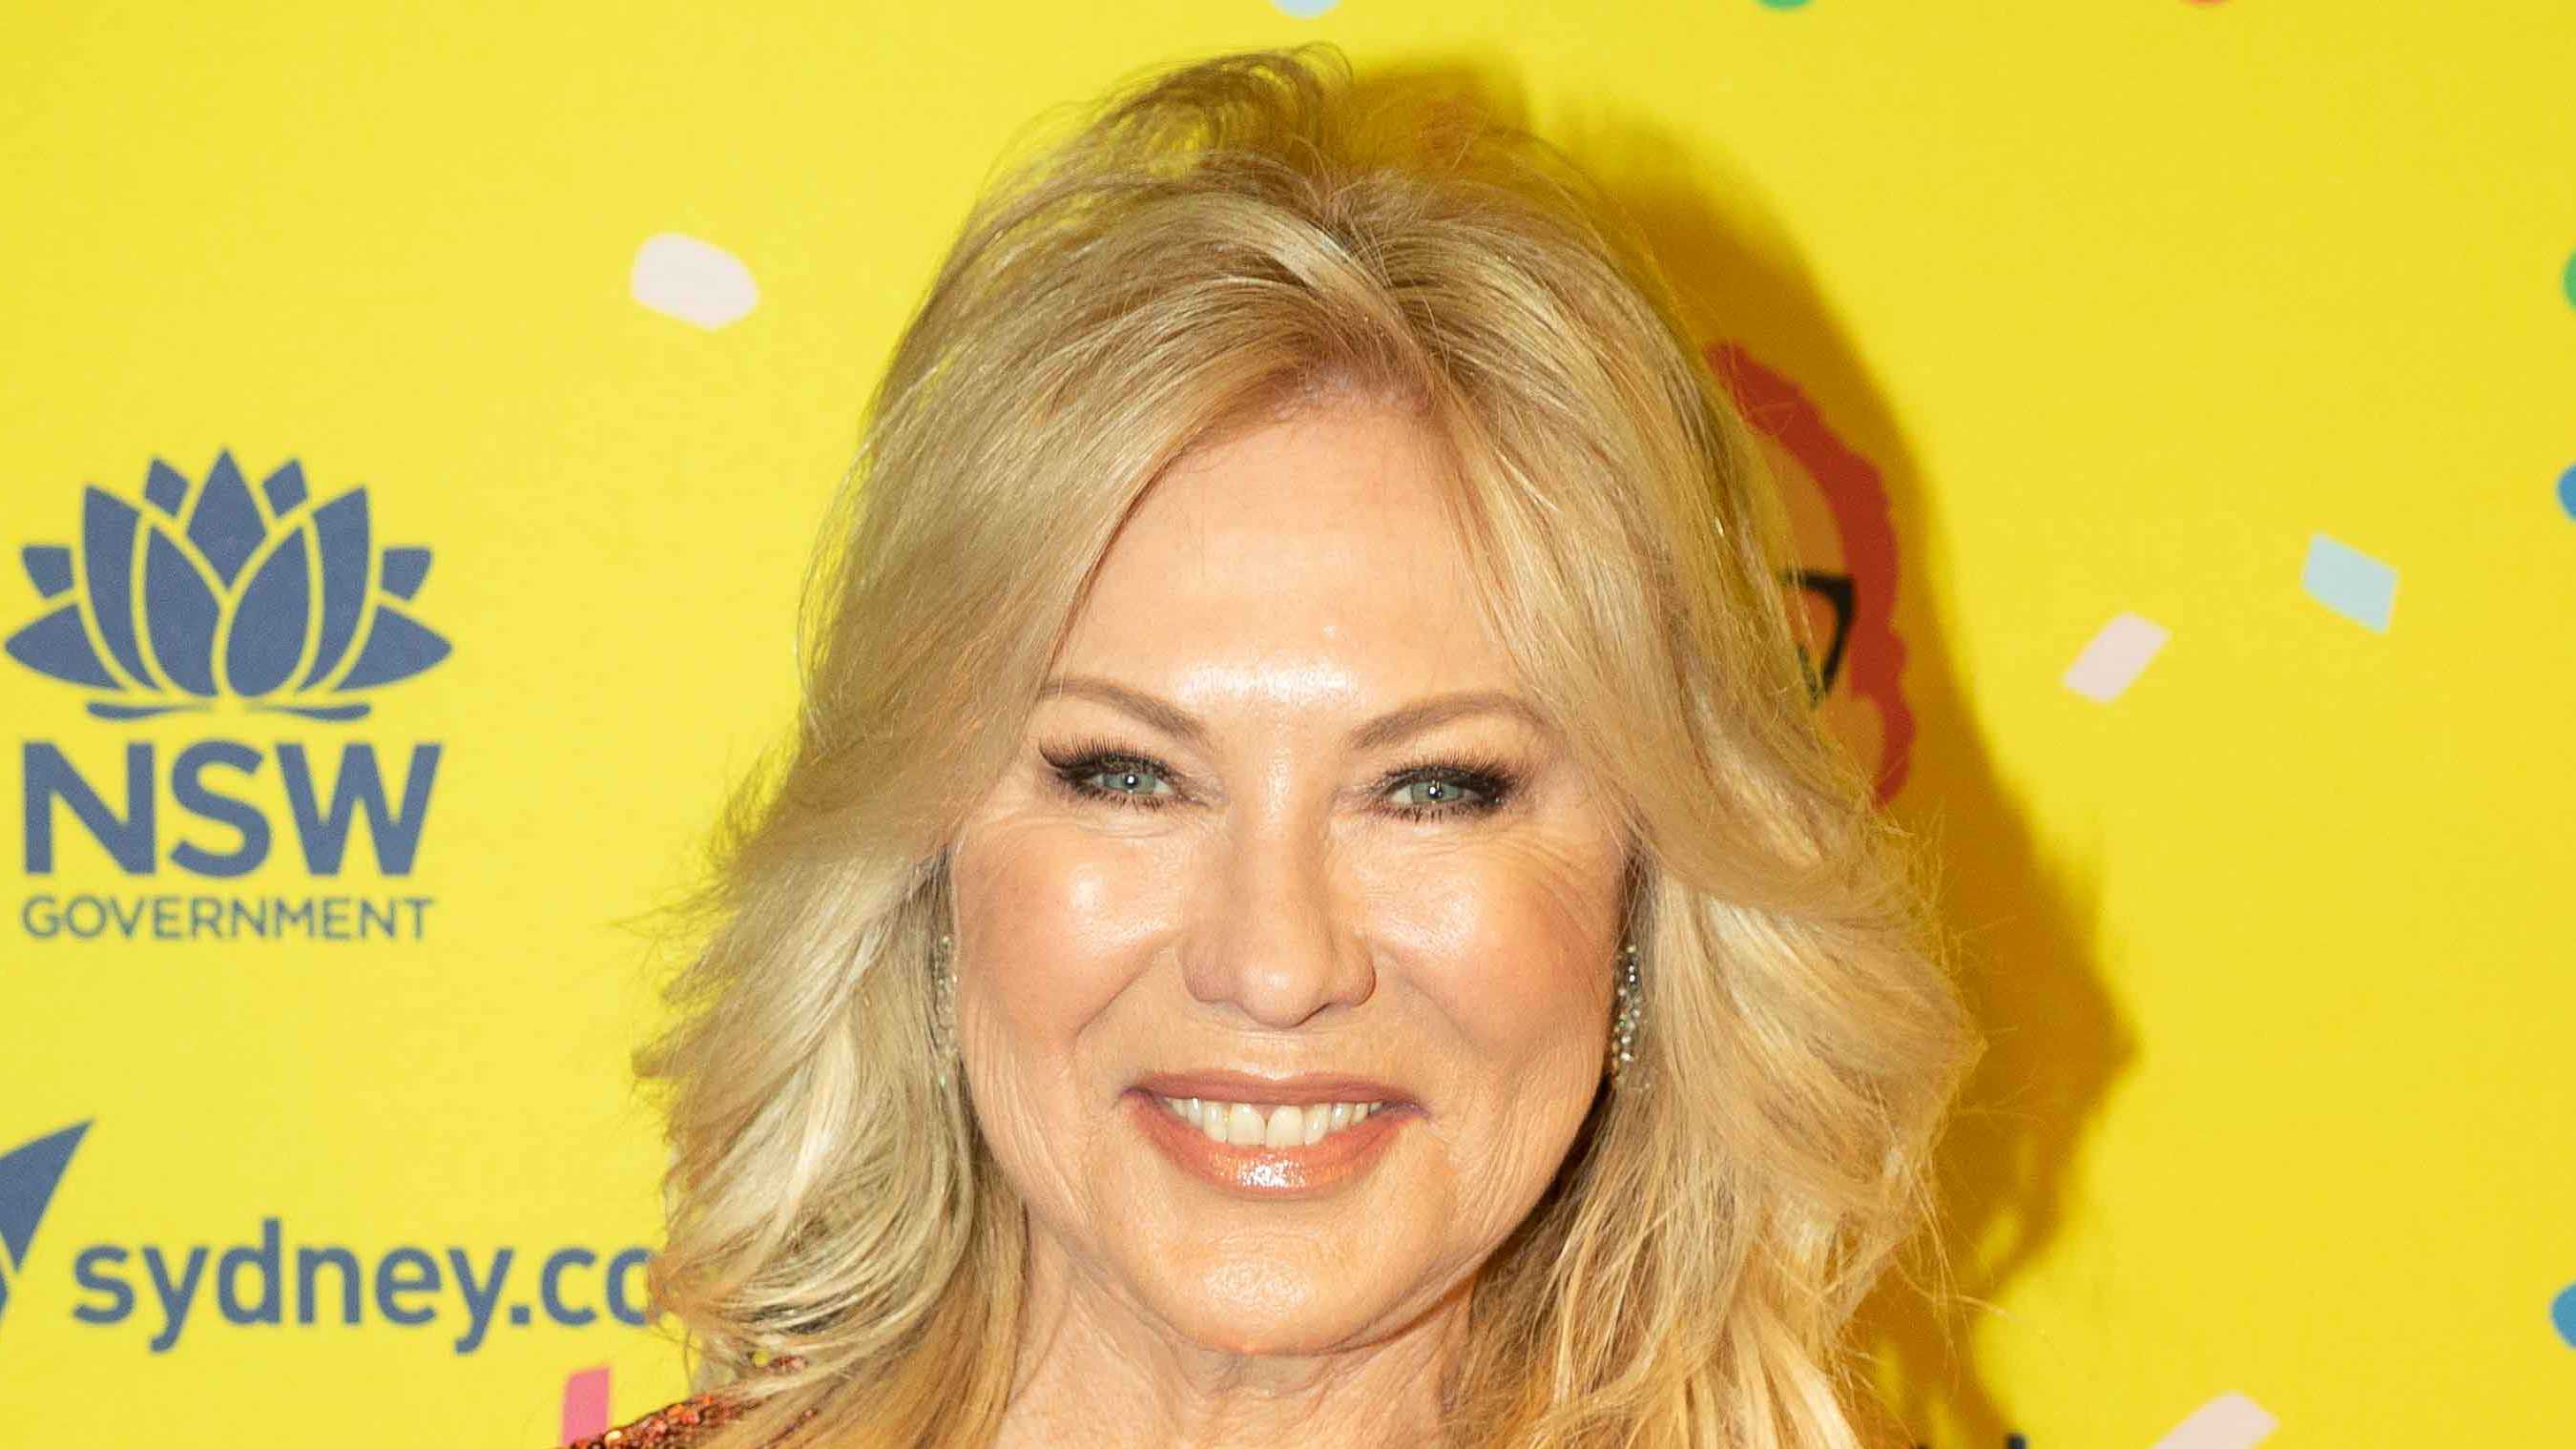 Glittering in gold! Kerri-Anne Kennerley sparkles on the red carpet 